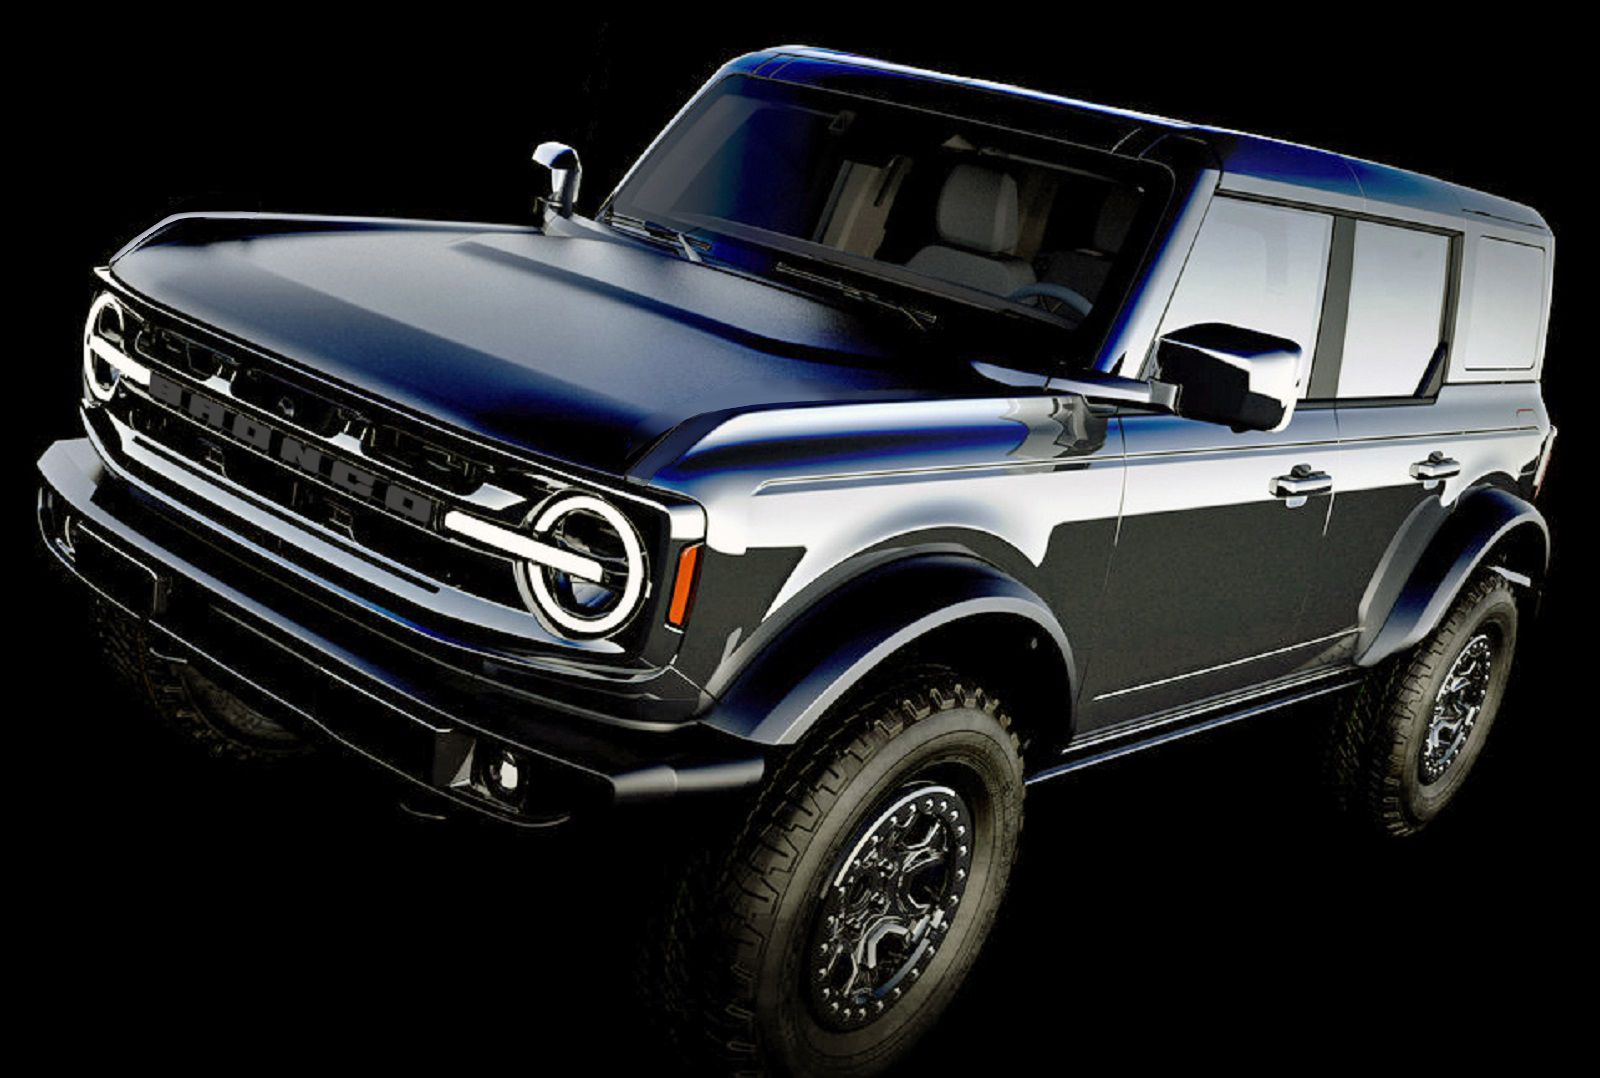 Ford Bronco Blacked Out Broncos Ford-Bronco-CAD-Drawing-3 alt a